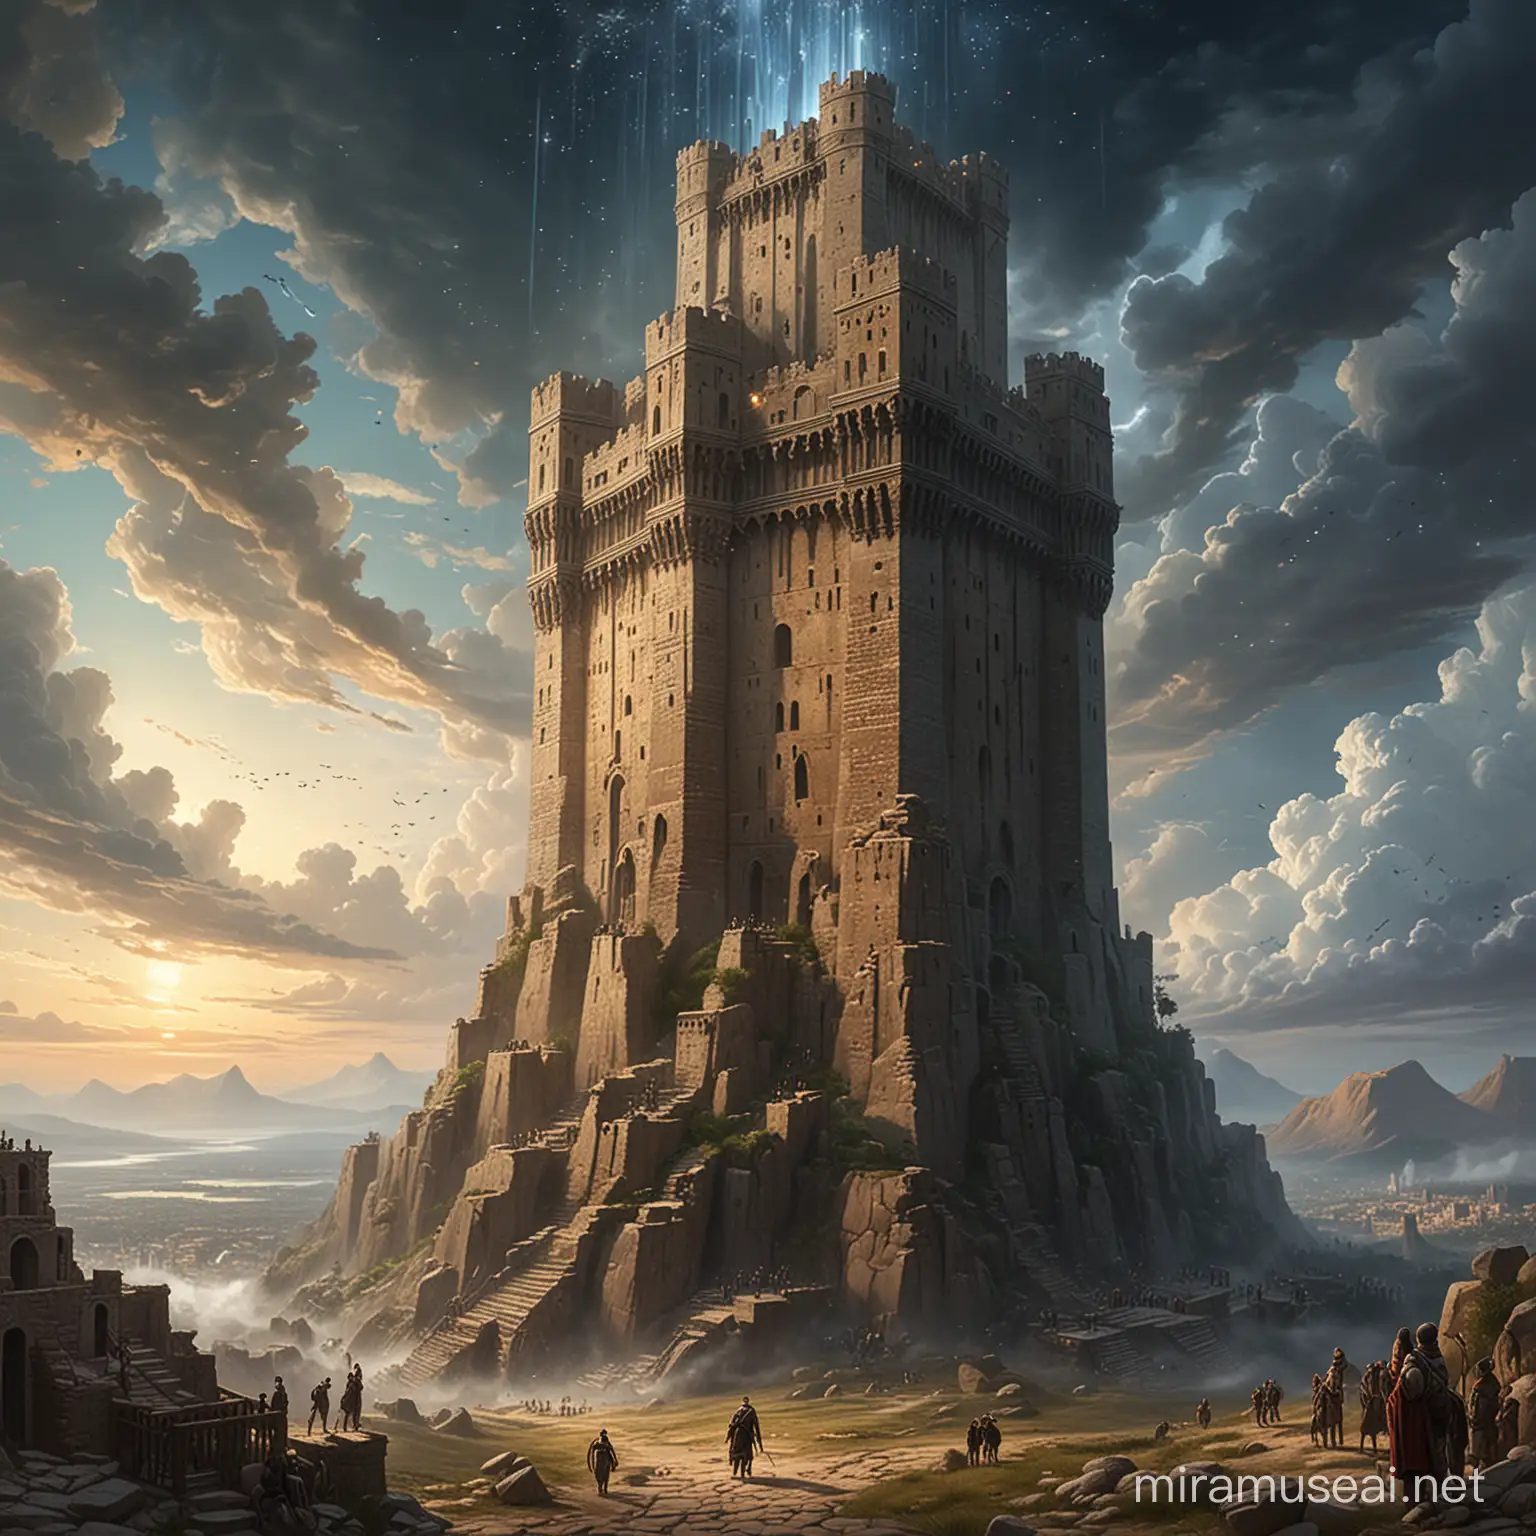 civilization that resides in a tower made of language that reaches the heavens